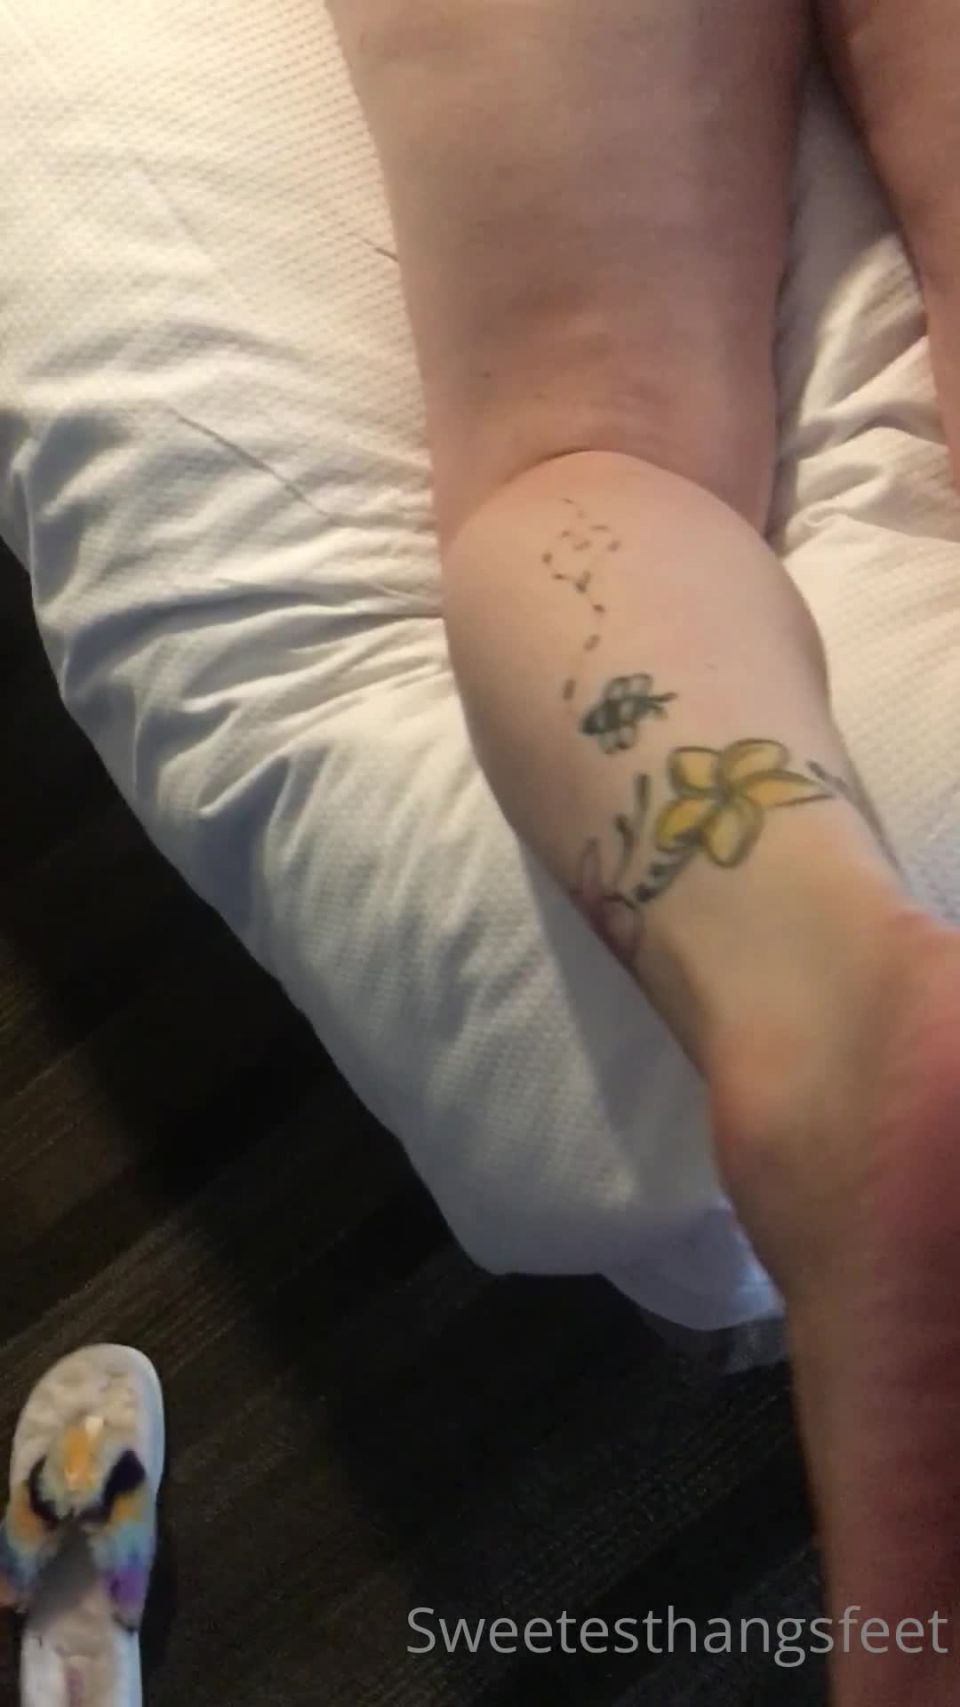  feet porn | sweetesthangsfeet  73082539 part 3 with adam and yes the cum shot | feet